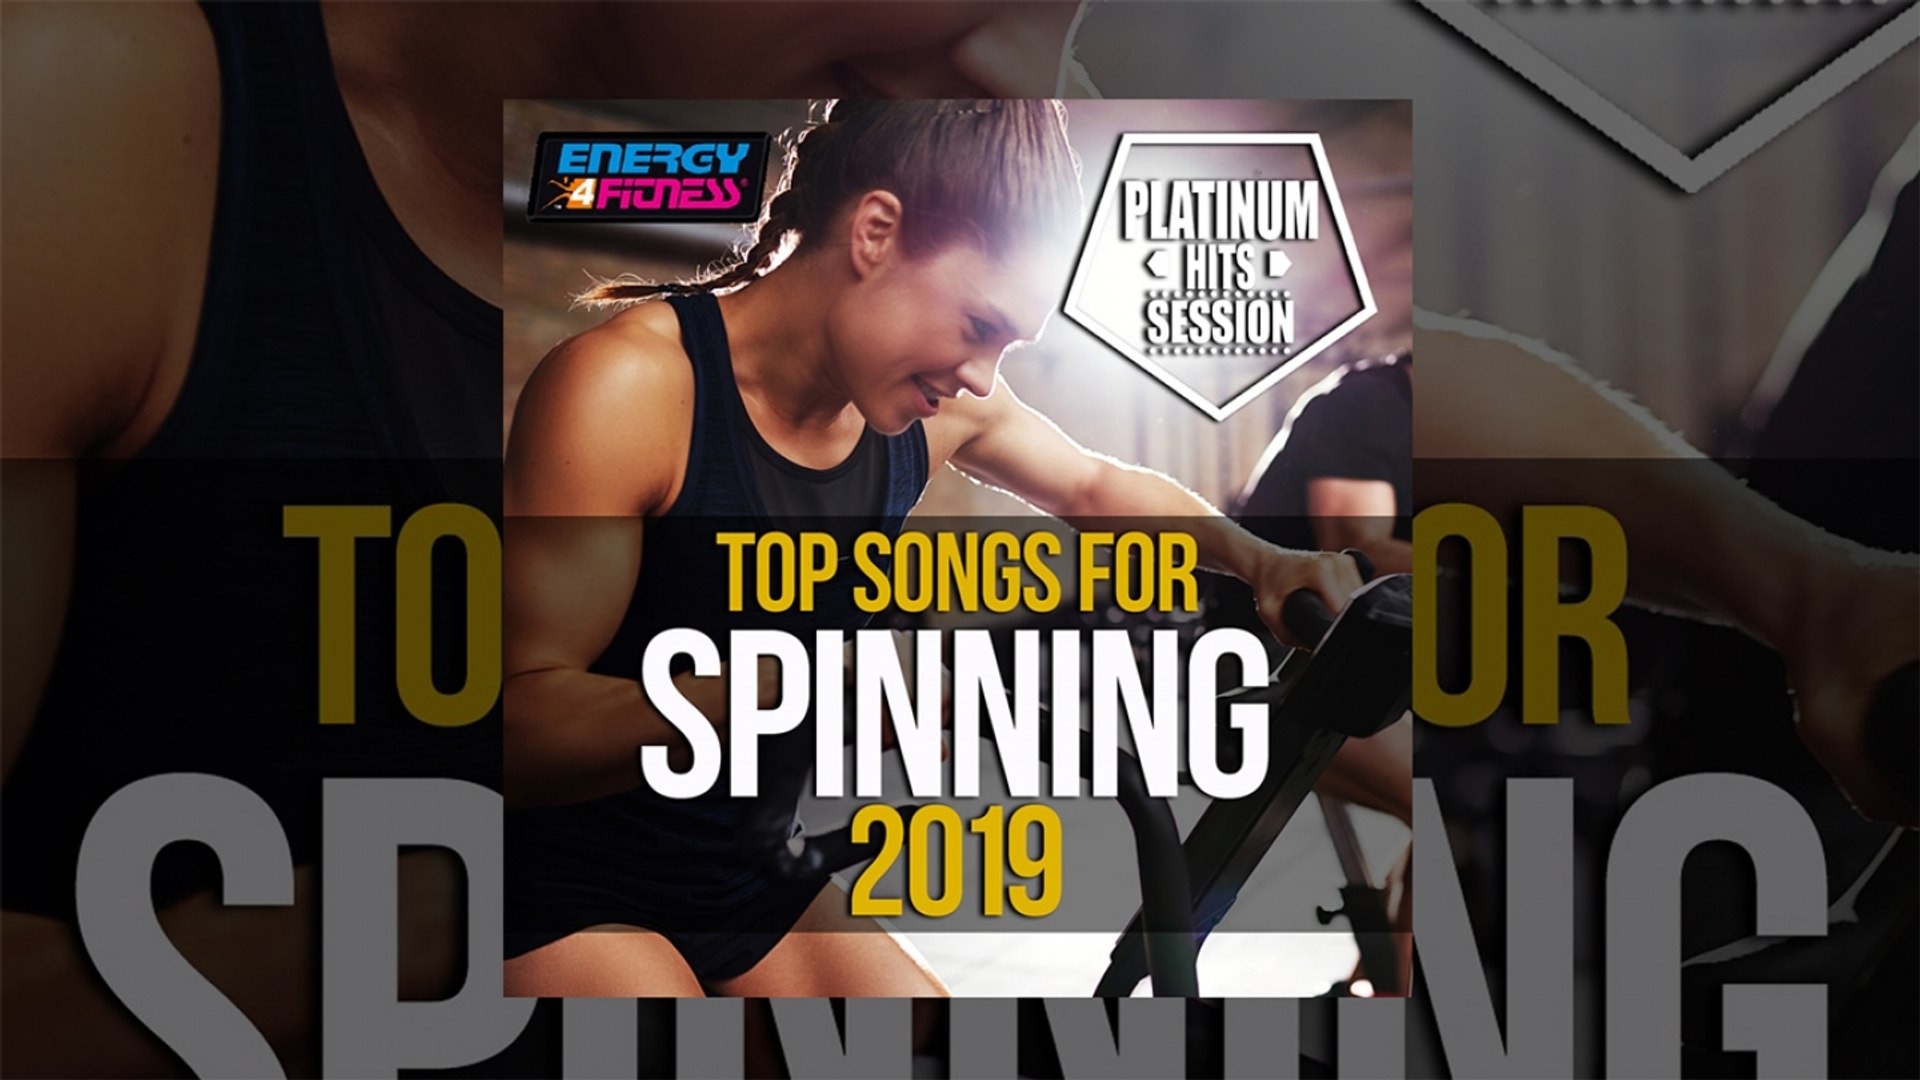 E4F - Top Songs For Spinning 2019 Platinum Hits Session - Fitness & Music 2019